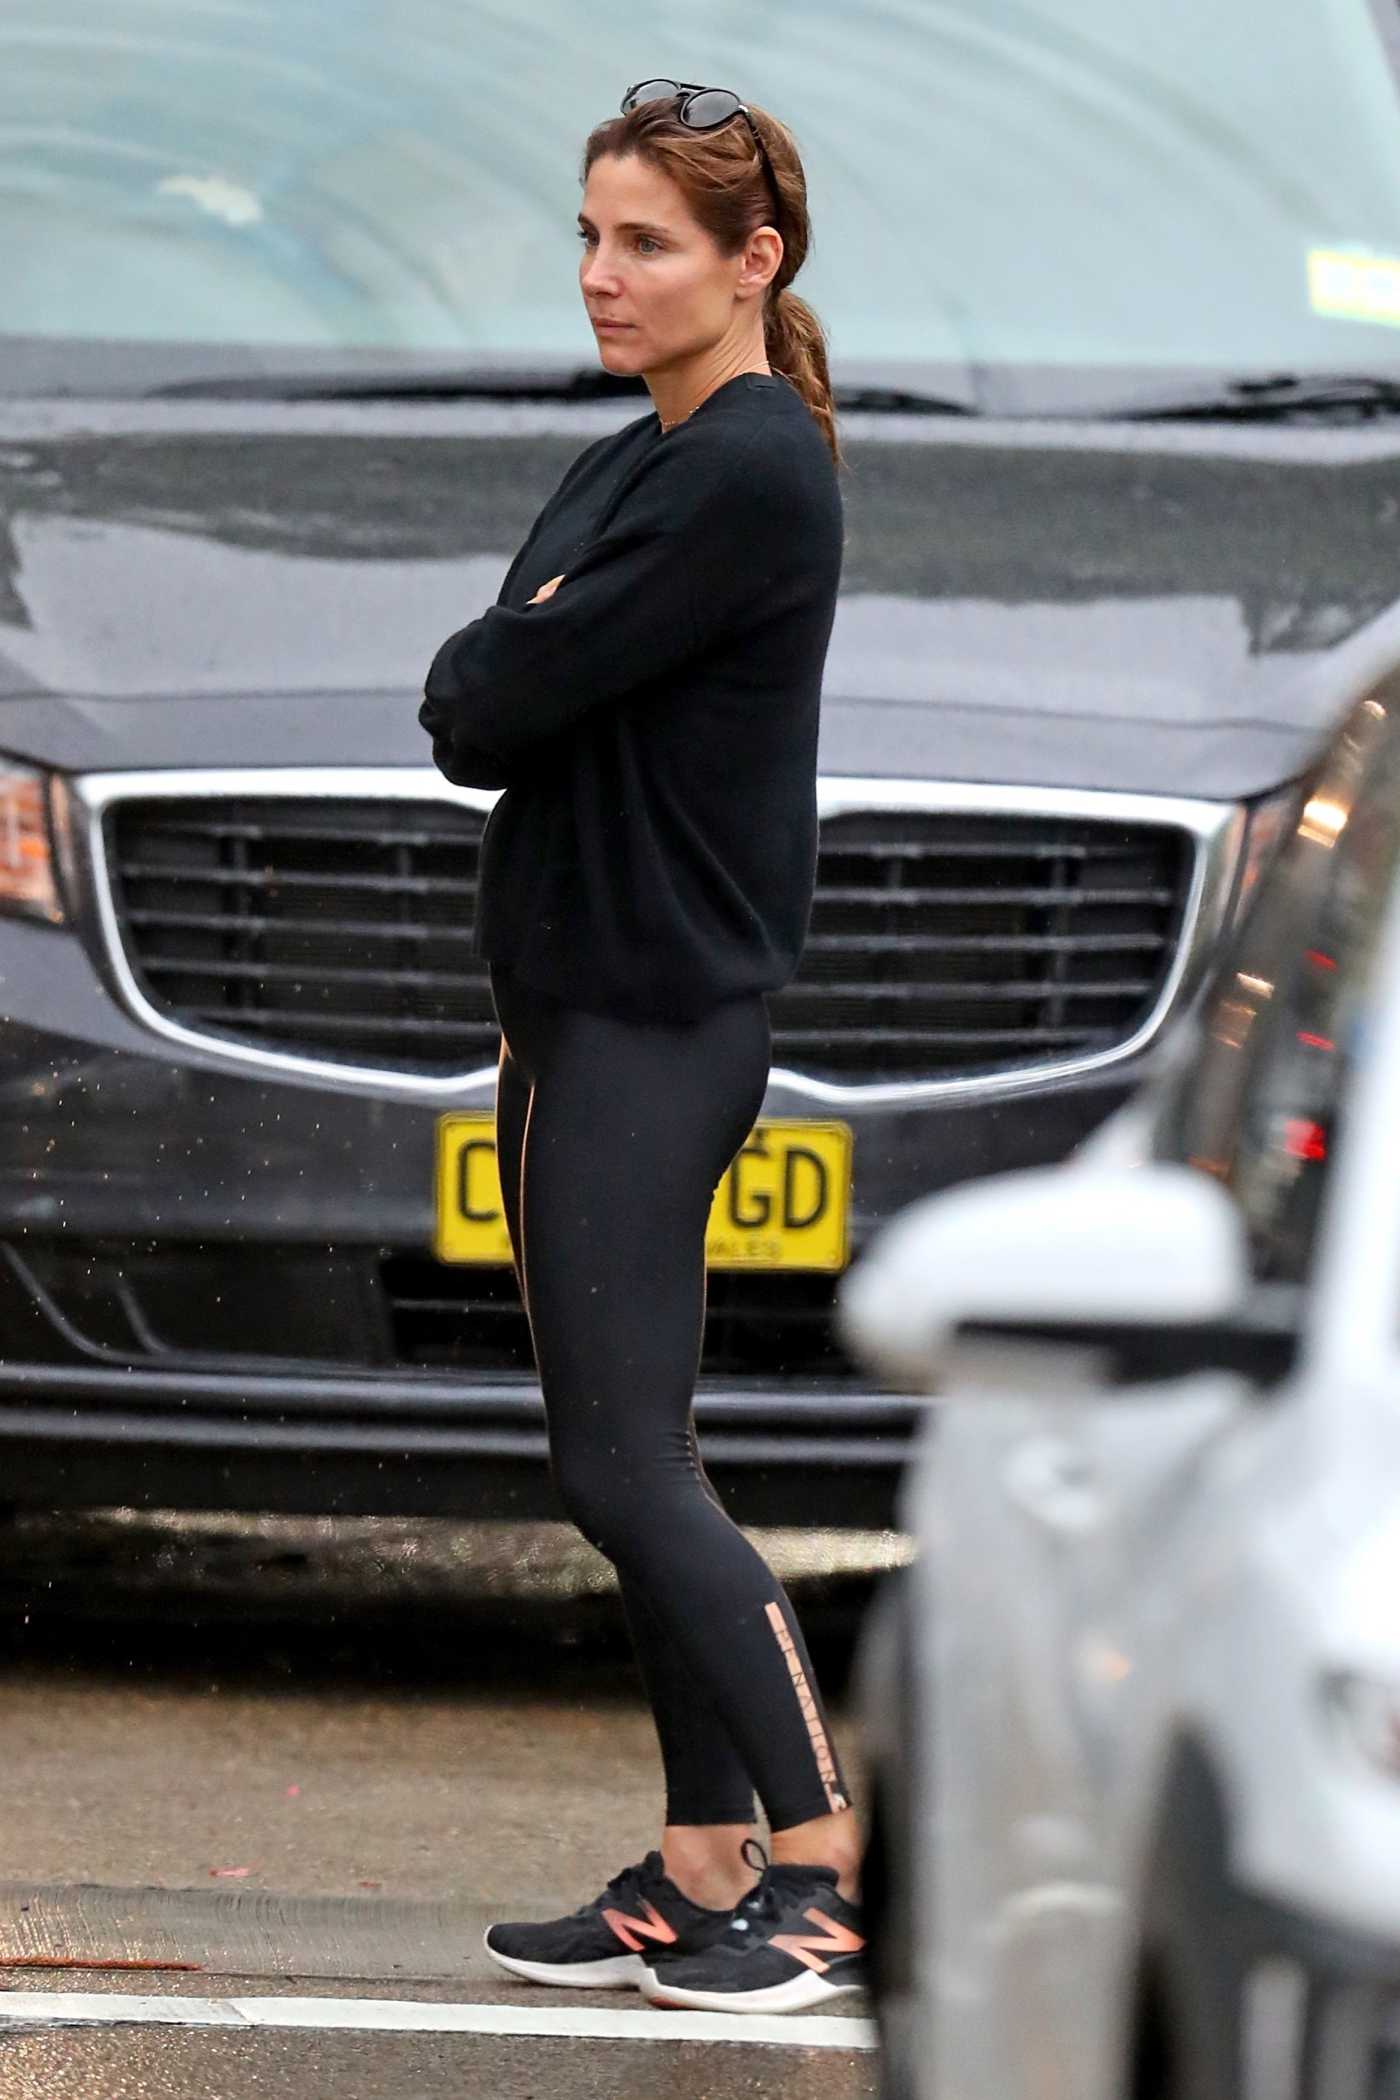 Elsa Pataky in a Black Outfit Steps Out in the Rain in Sydney 03/18/2021